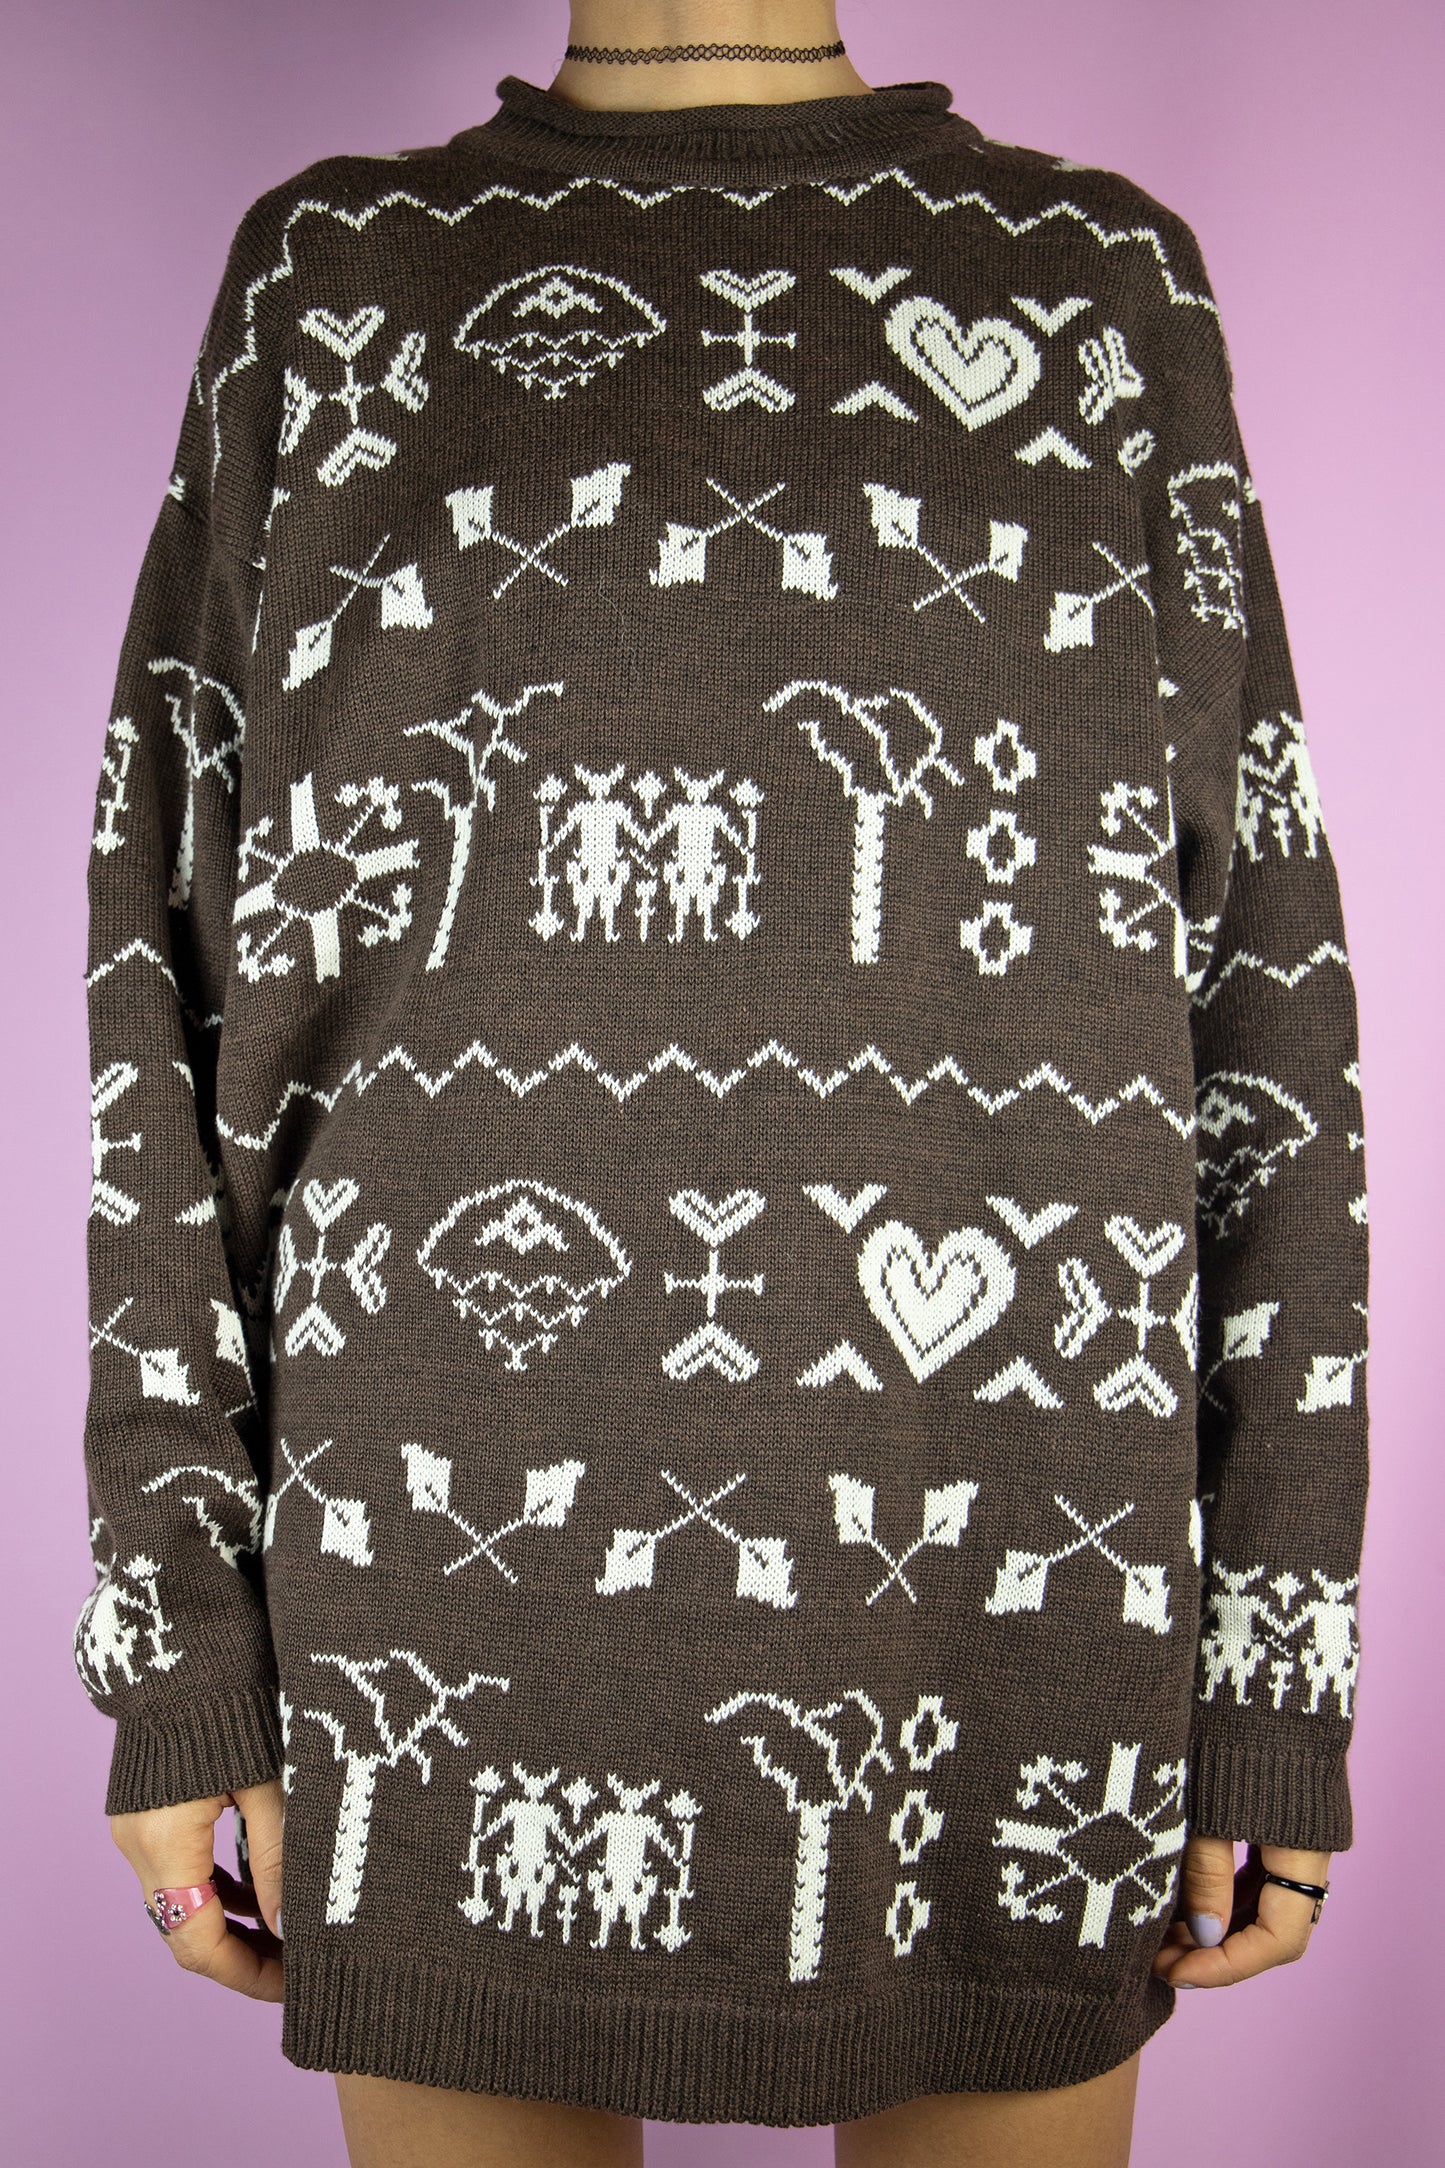 The Vintage 90s Brown Pattern Sweater is a dark brown pullover with an abstract geometric heart pattern. Christmas style 1990s knitted jumper.